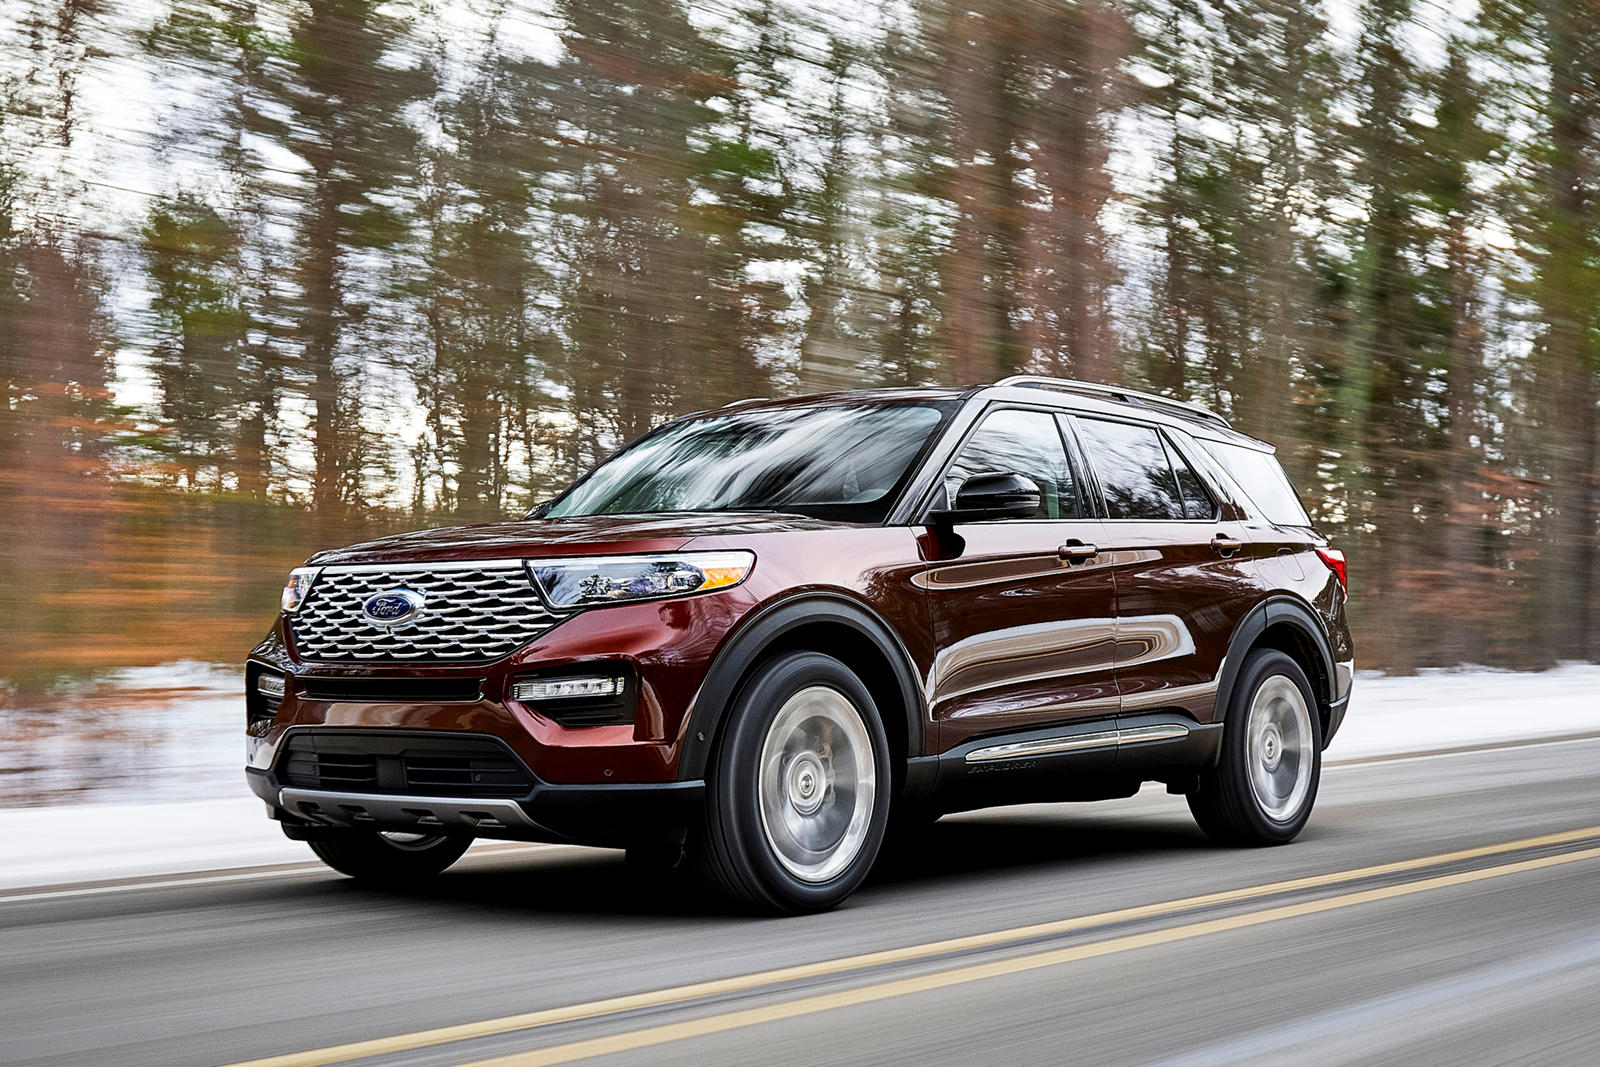 2021 Ford Explorer Review | New Ford Explorer SUV - Price, MPG, Towing 2021 Ford Explorer 4 Cylinder Towing Capacity